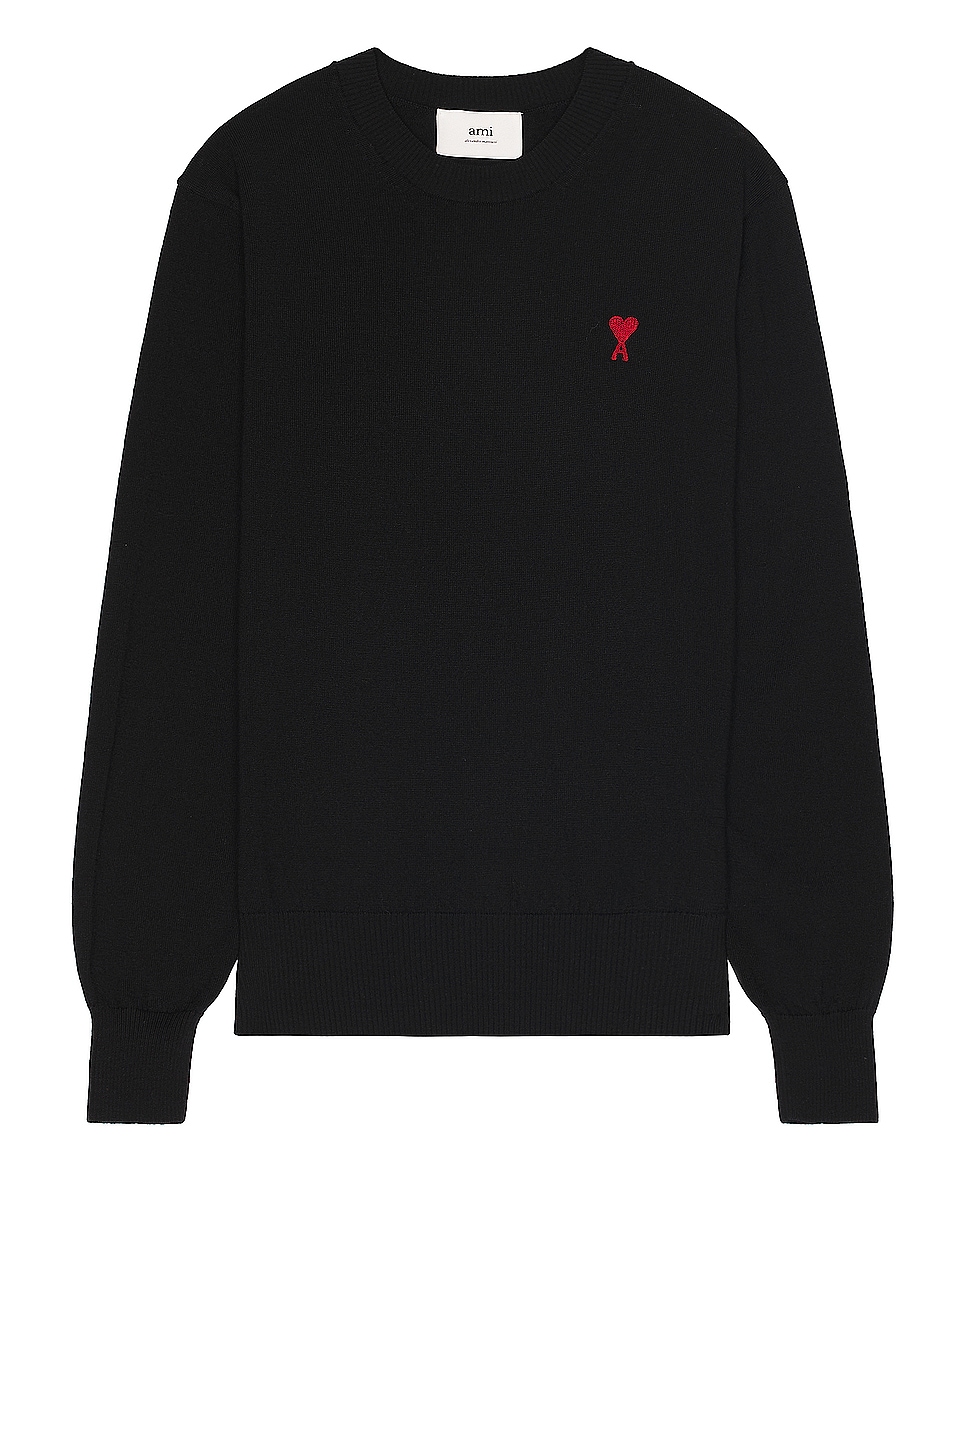 Image 1 of ami Red ADC Sweater in Black